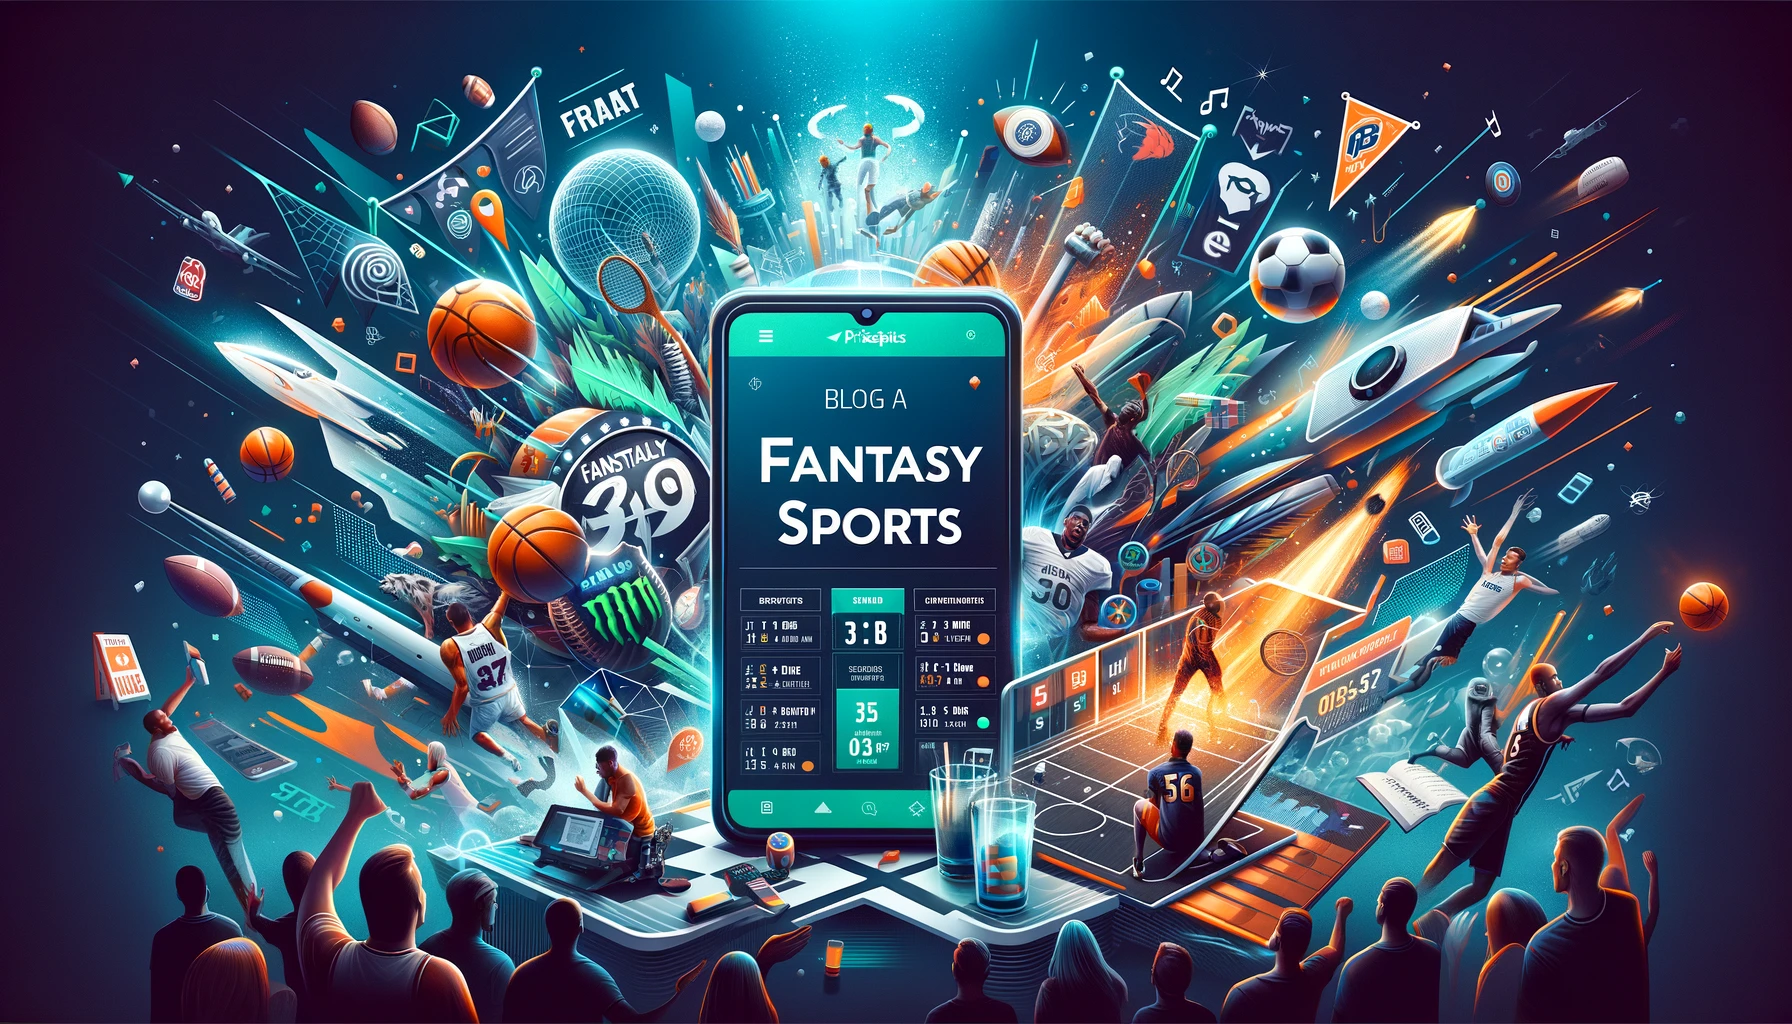 Dive into the world of PrizePicks fantasy sports! Experience the thrill of the game with innovative, fan-first fantasy sports engagement.